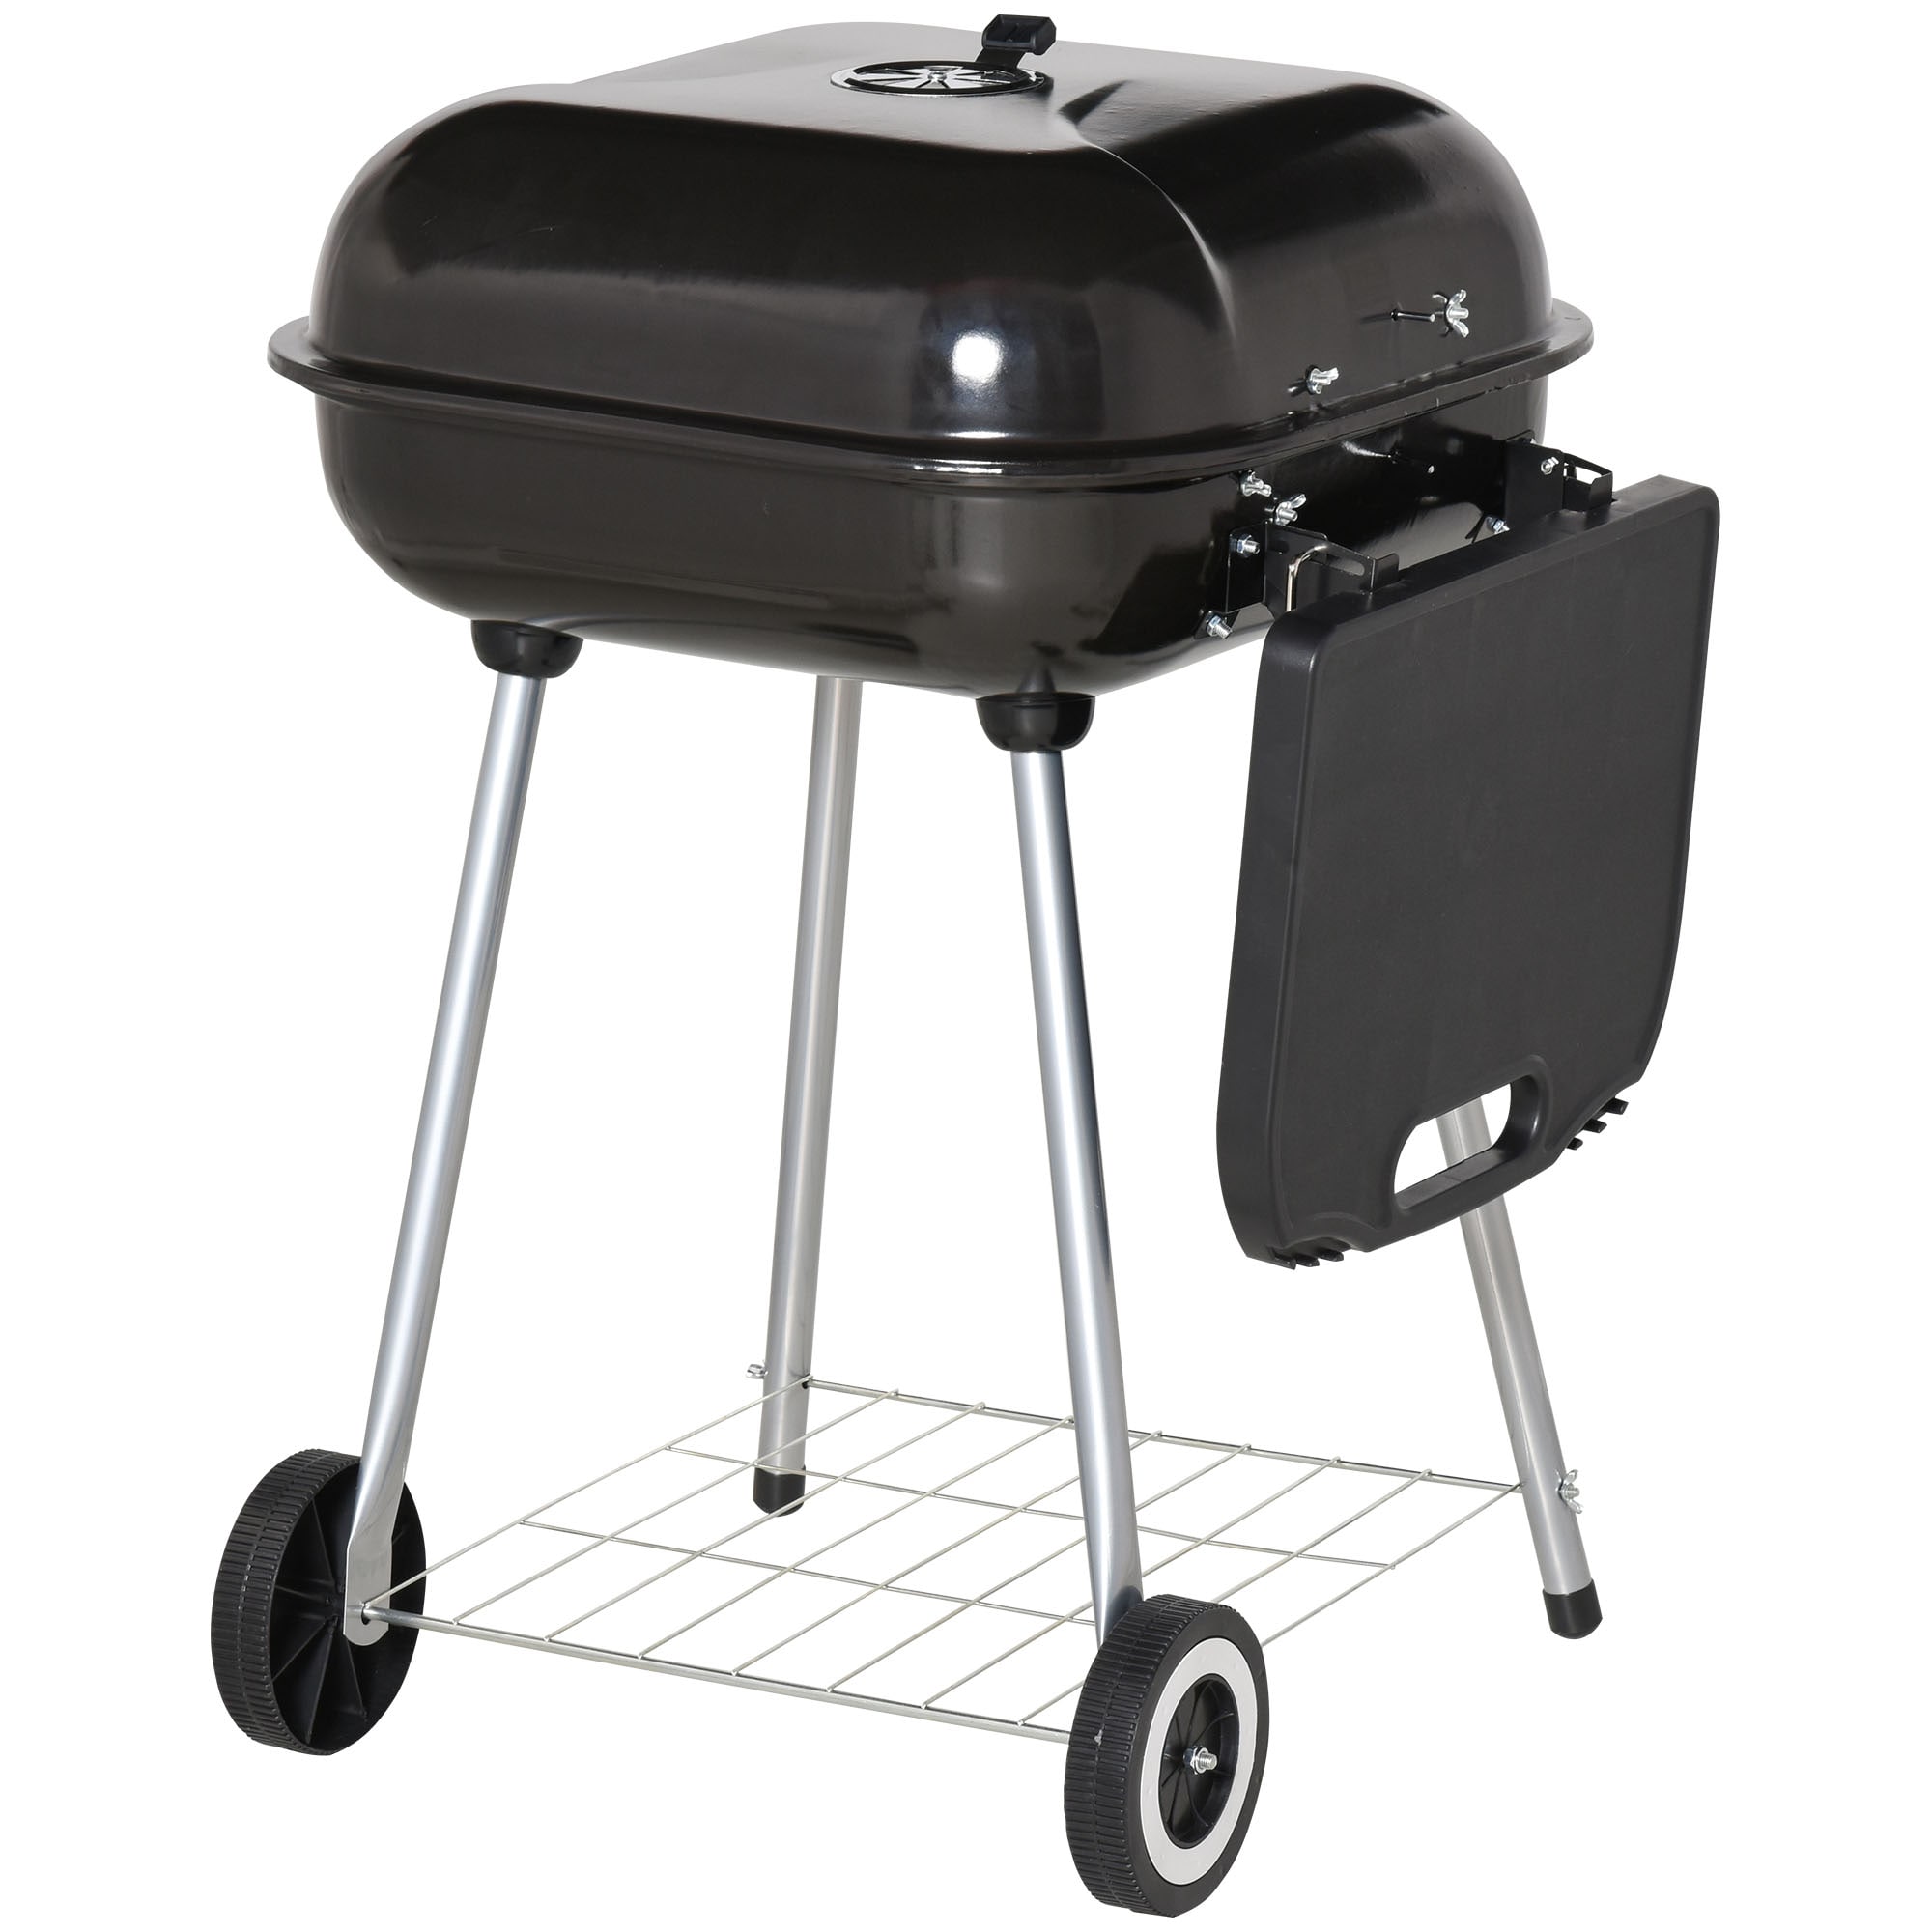 Outsunny 21.25-in W Black Charcoal Grill in the Charcoal Grills department  at